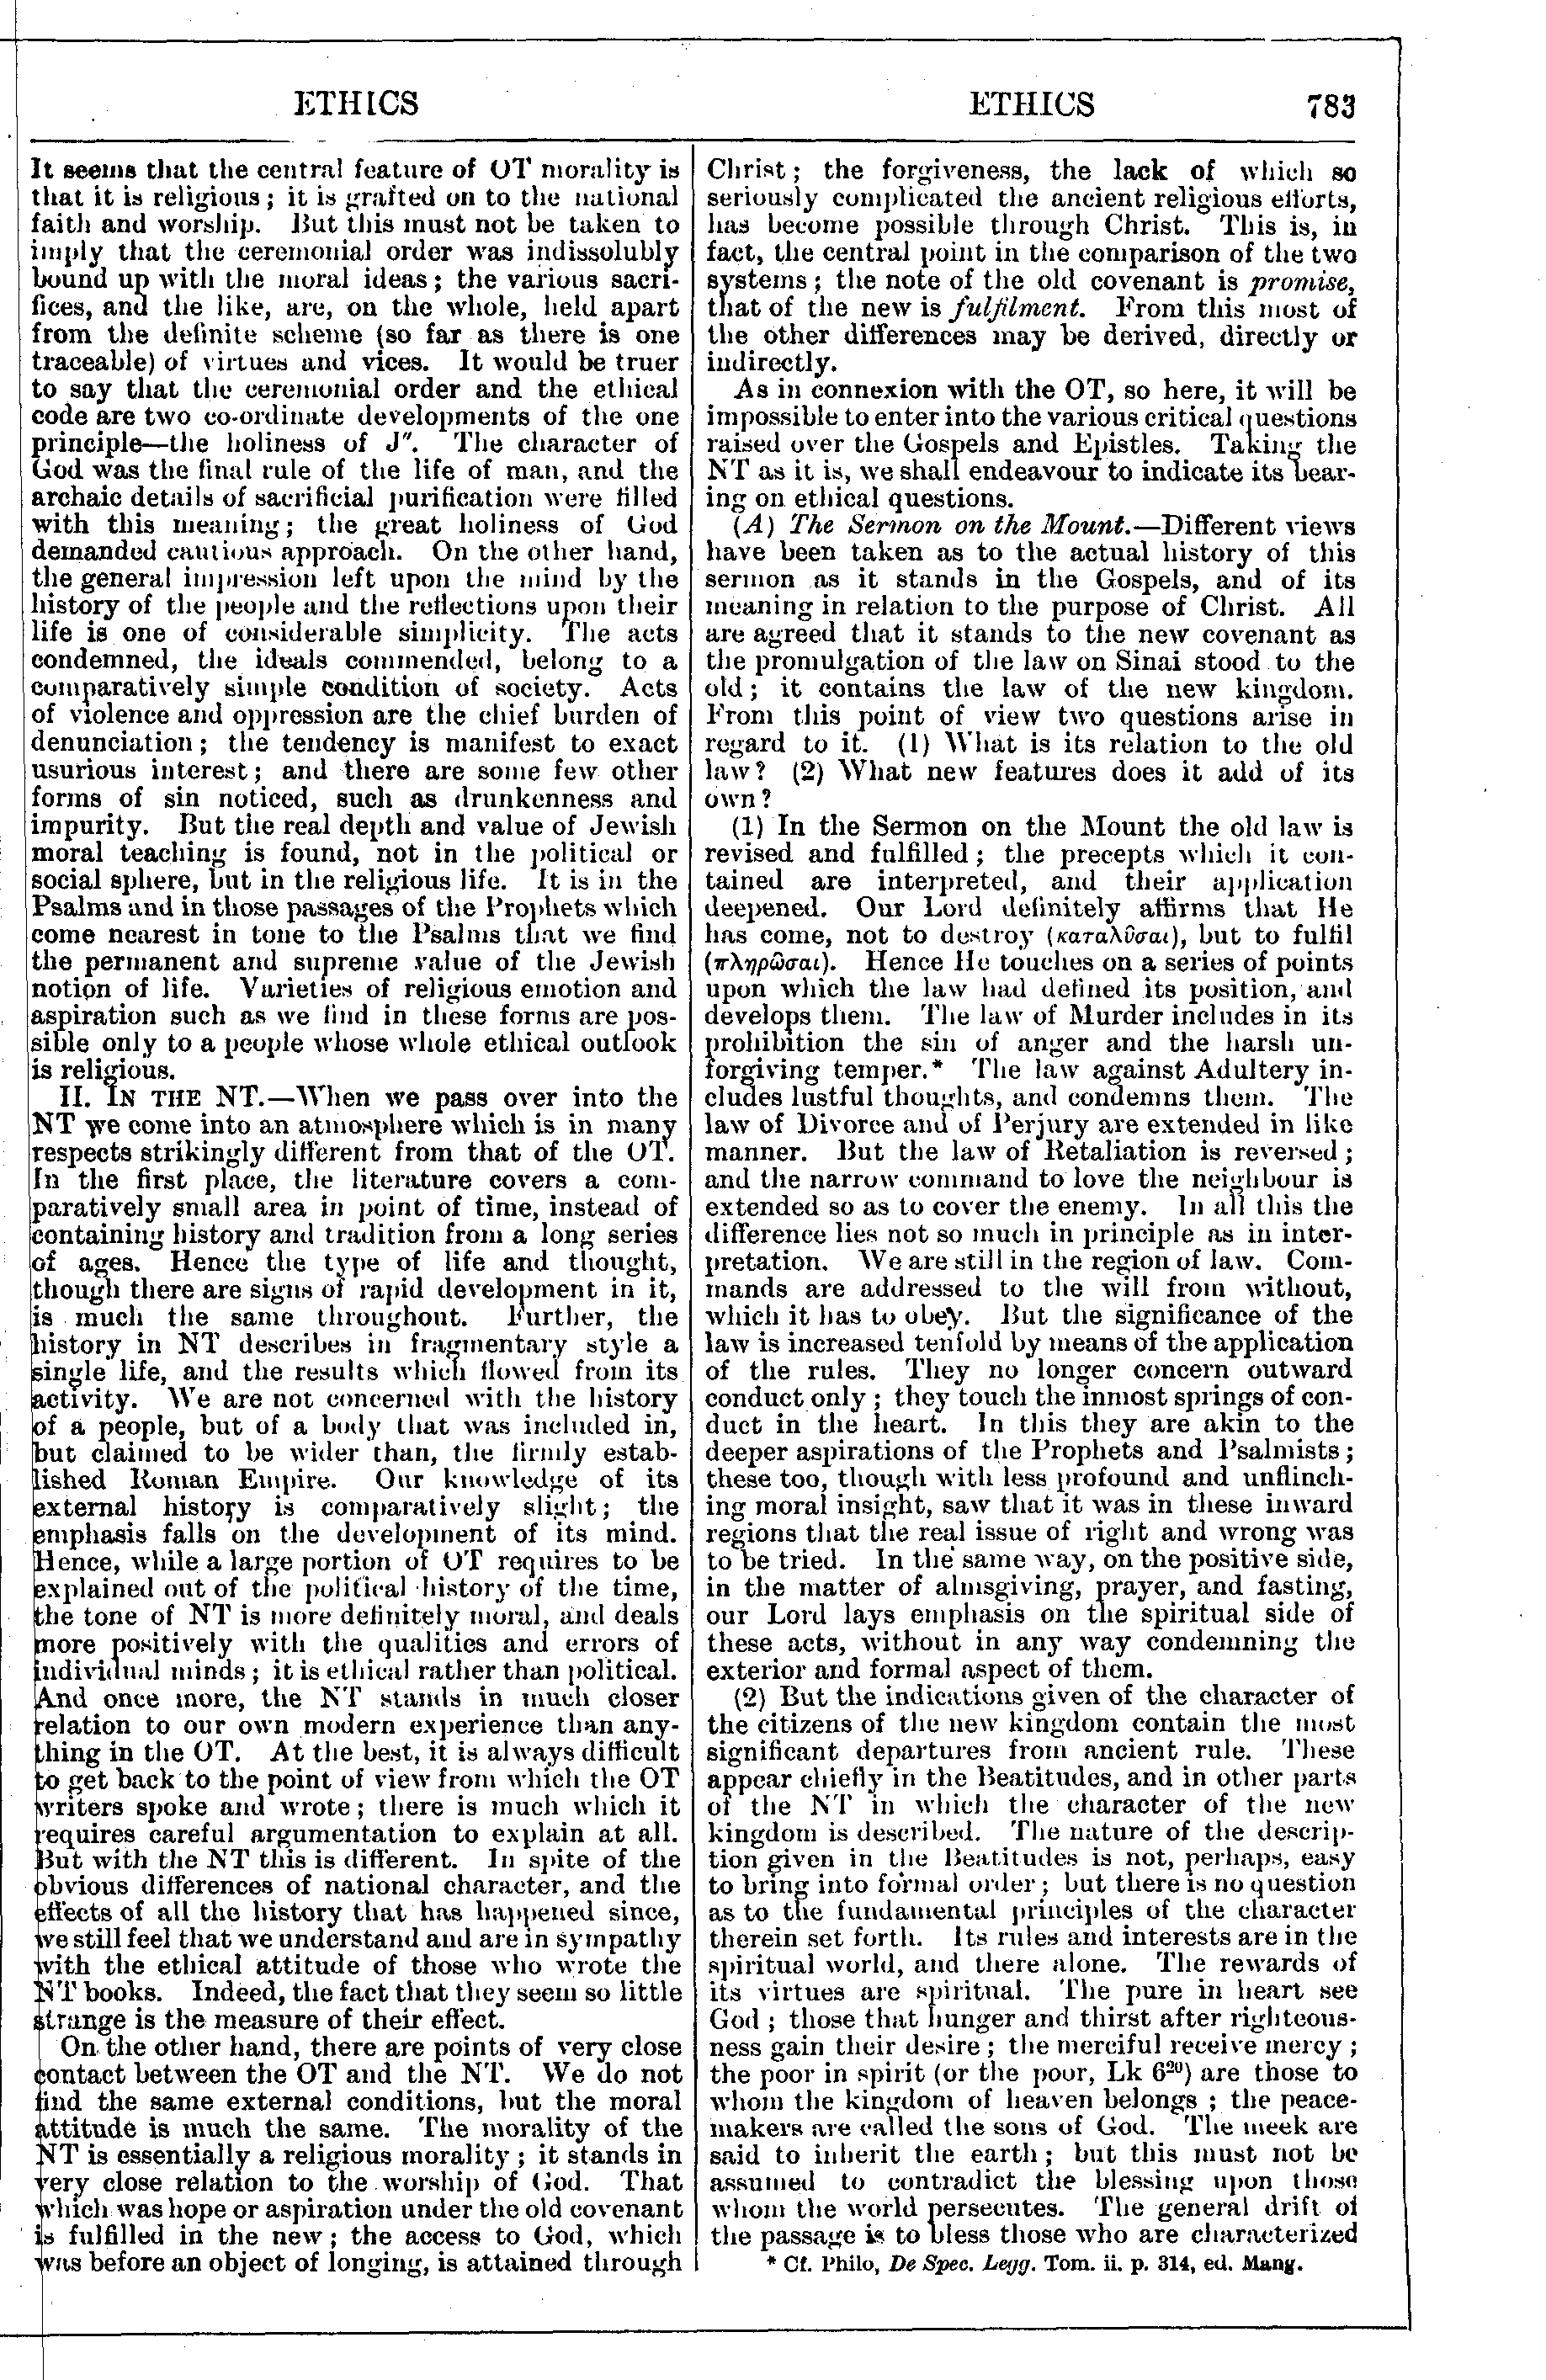 Image of page 783